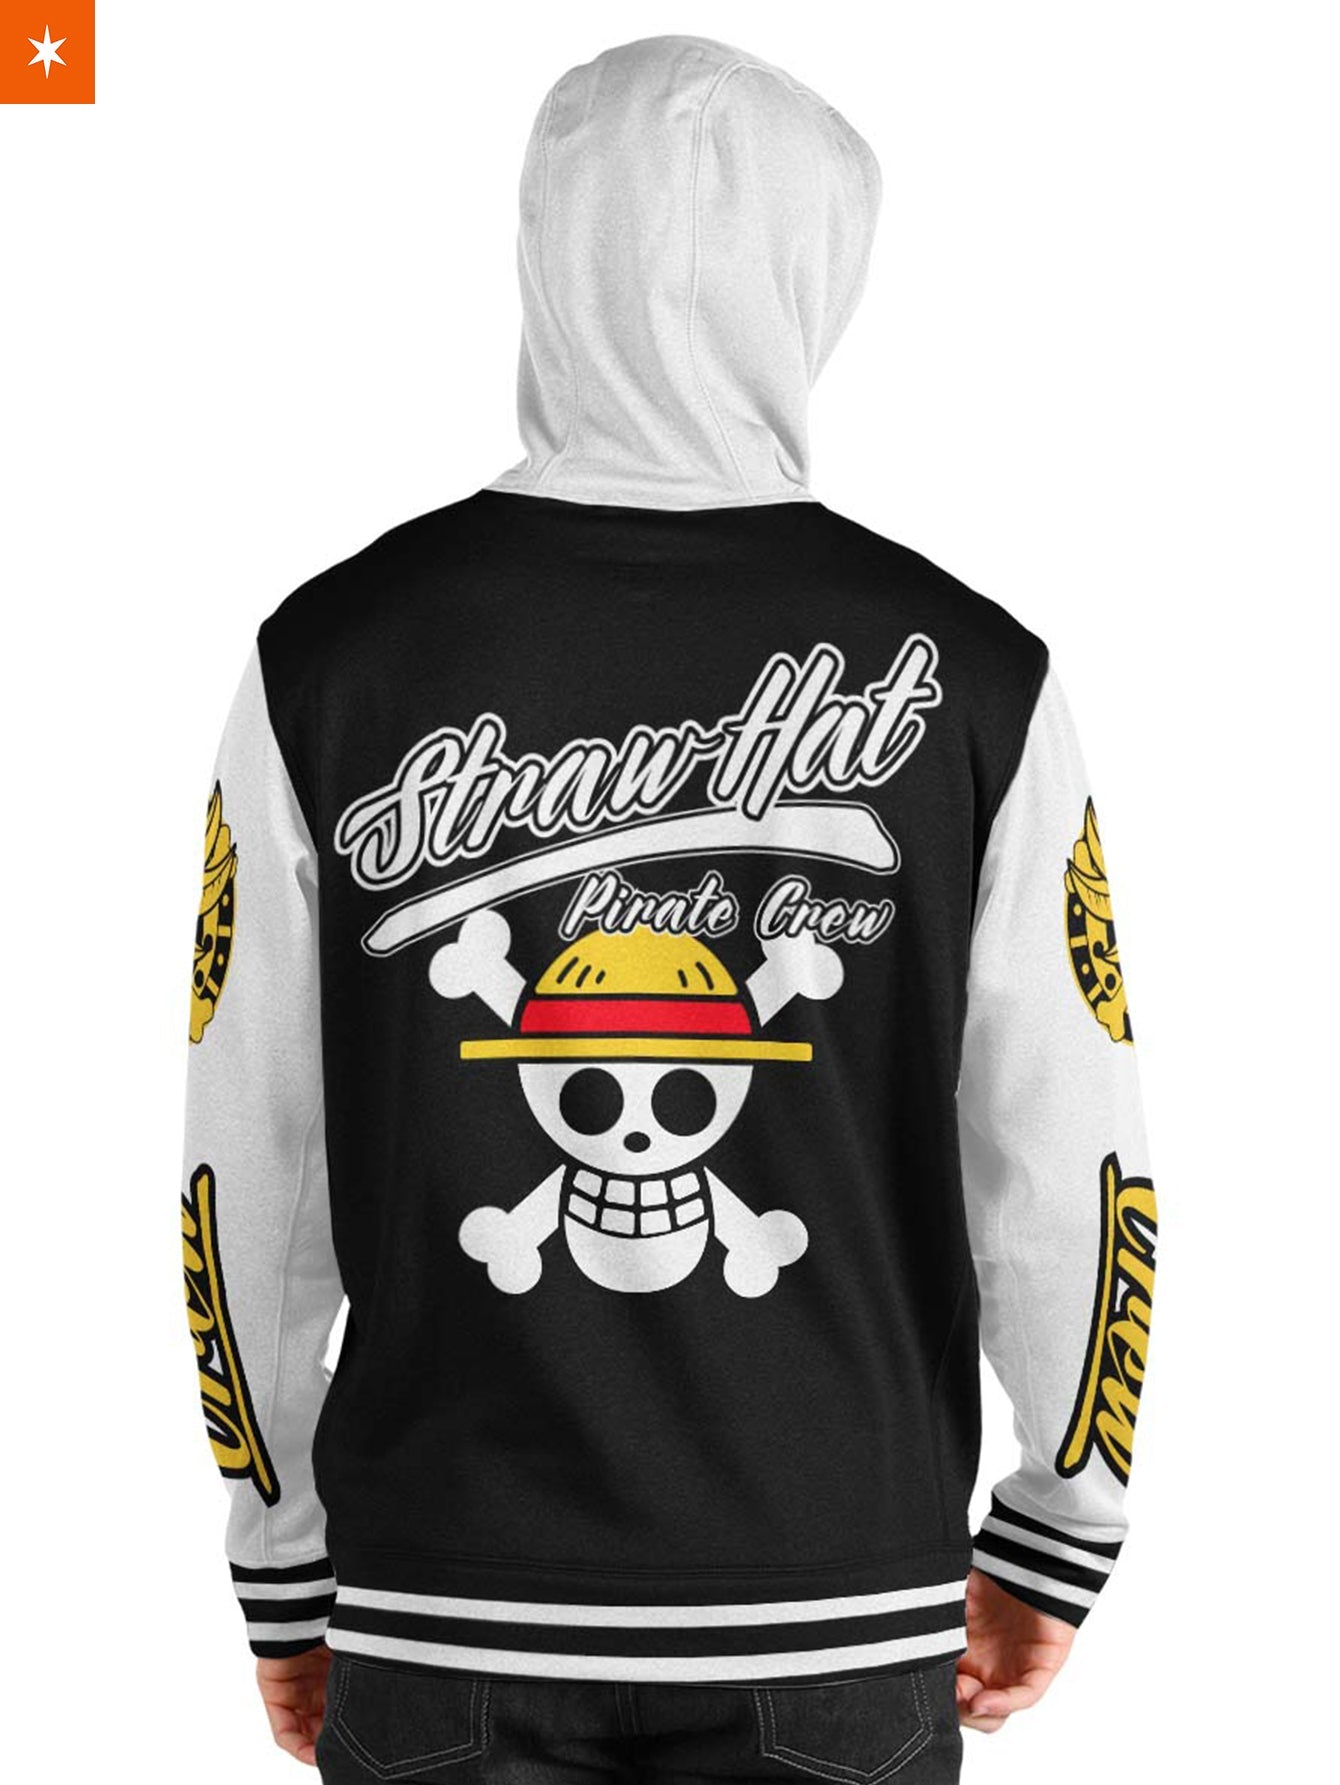 Fandomaniax - Strawhat Jersey V2 Unisex Pullover Hoodie